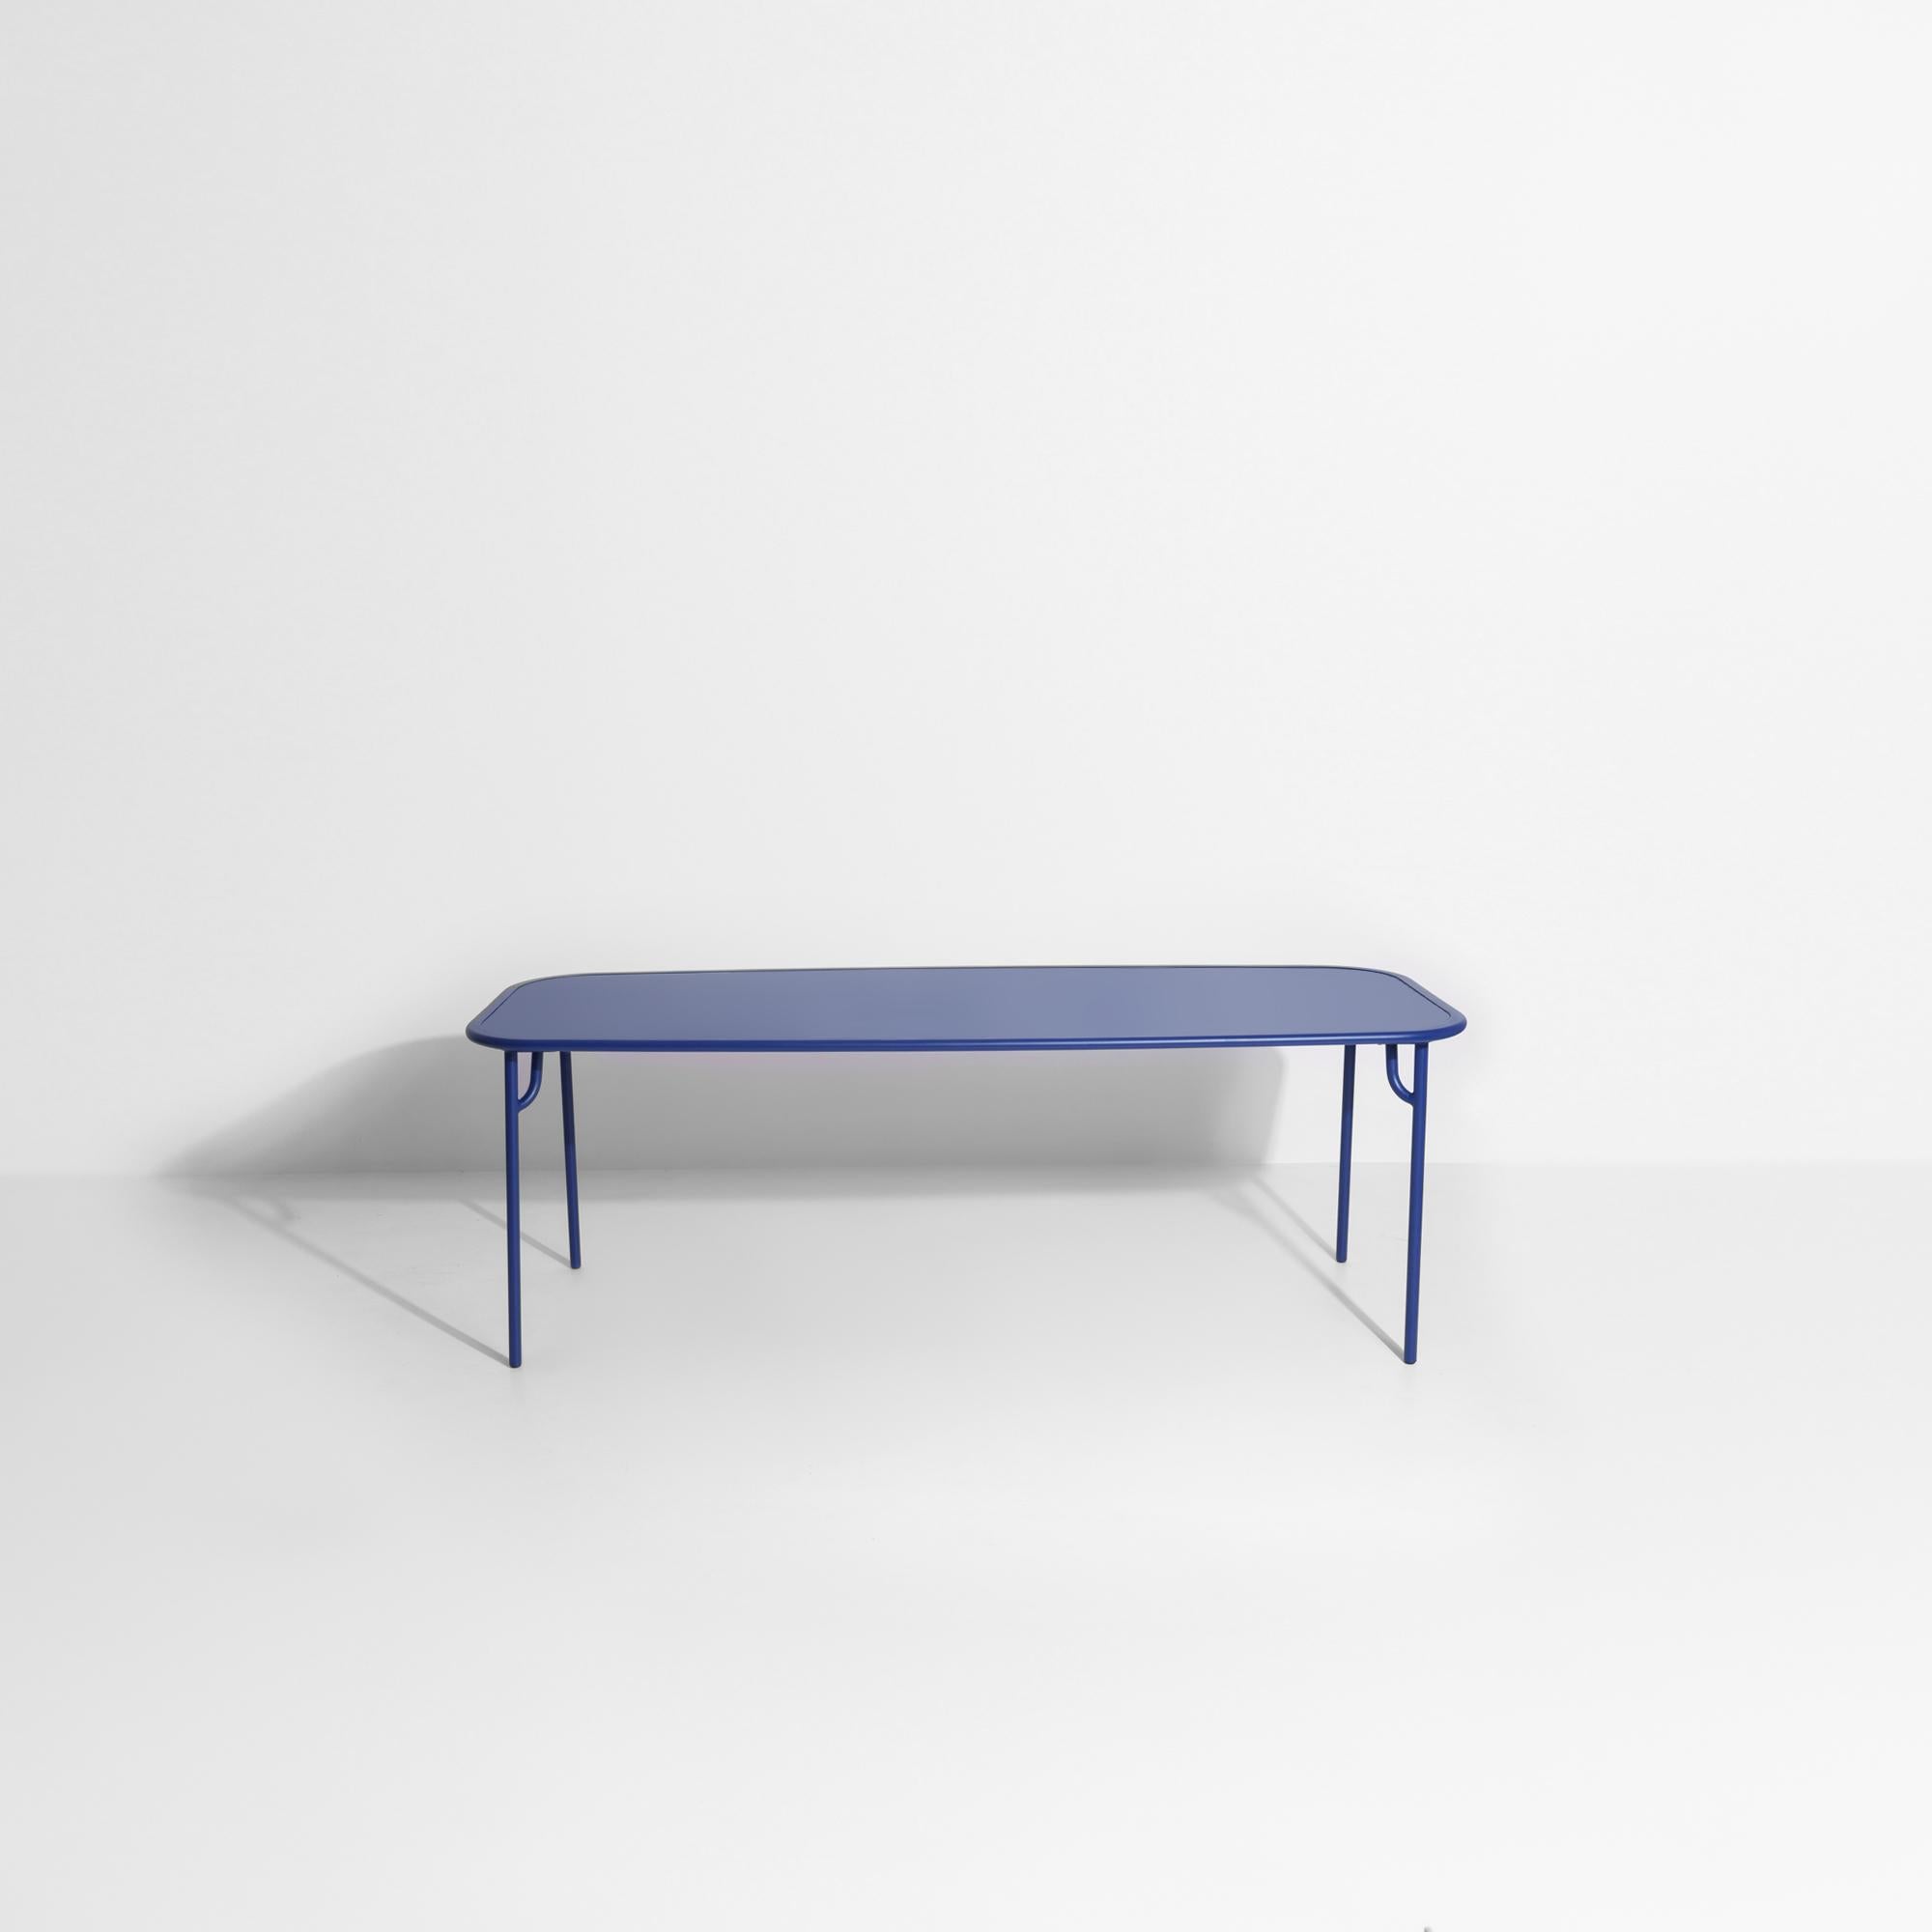 Petite Friture Week-End Large Plain Rectangular Dining Table in Blue Aluminium In New Condition For Sale In Brooklyn, NY